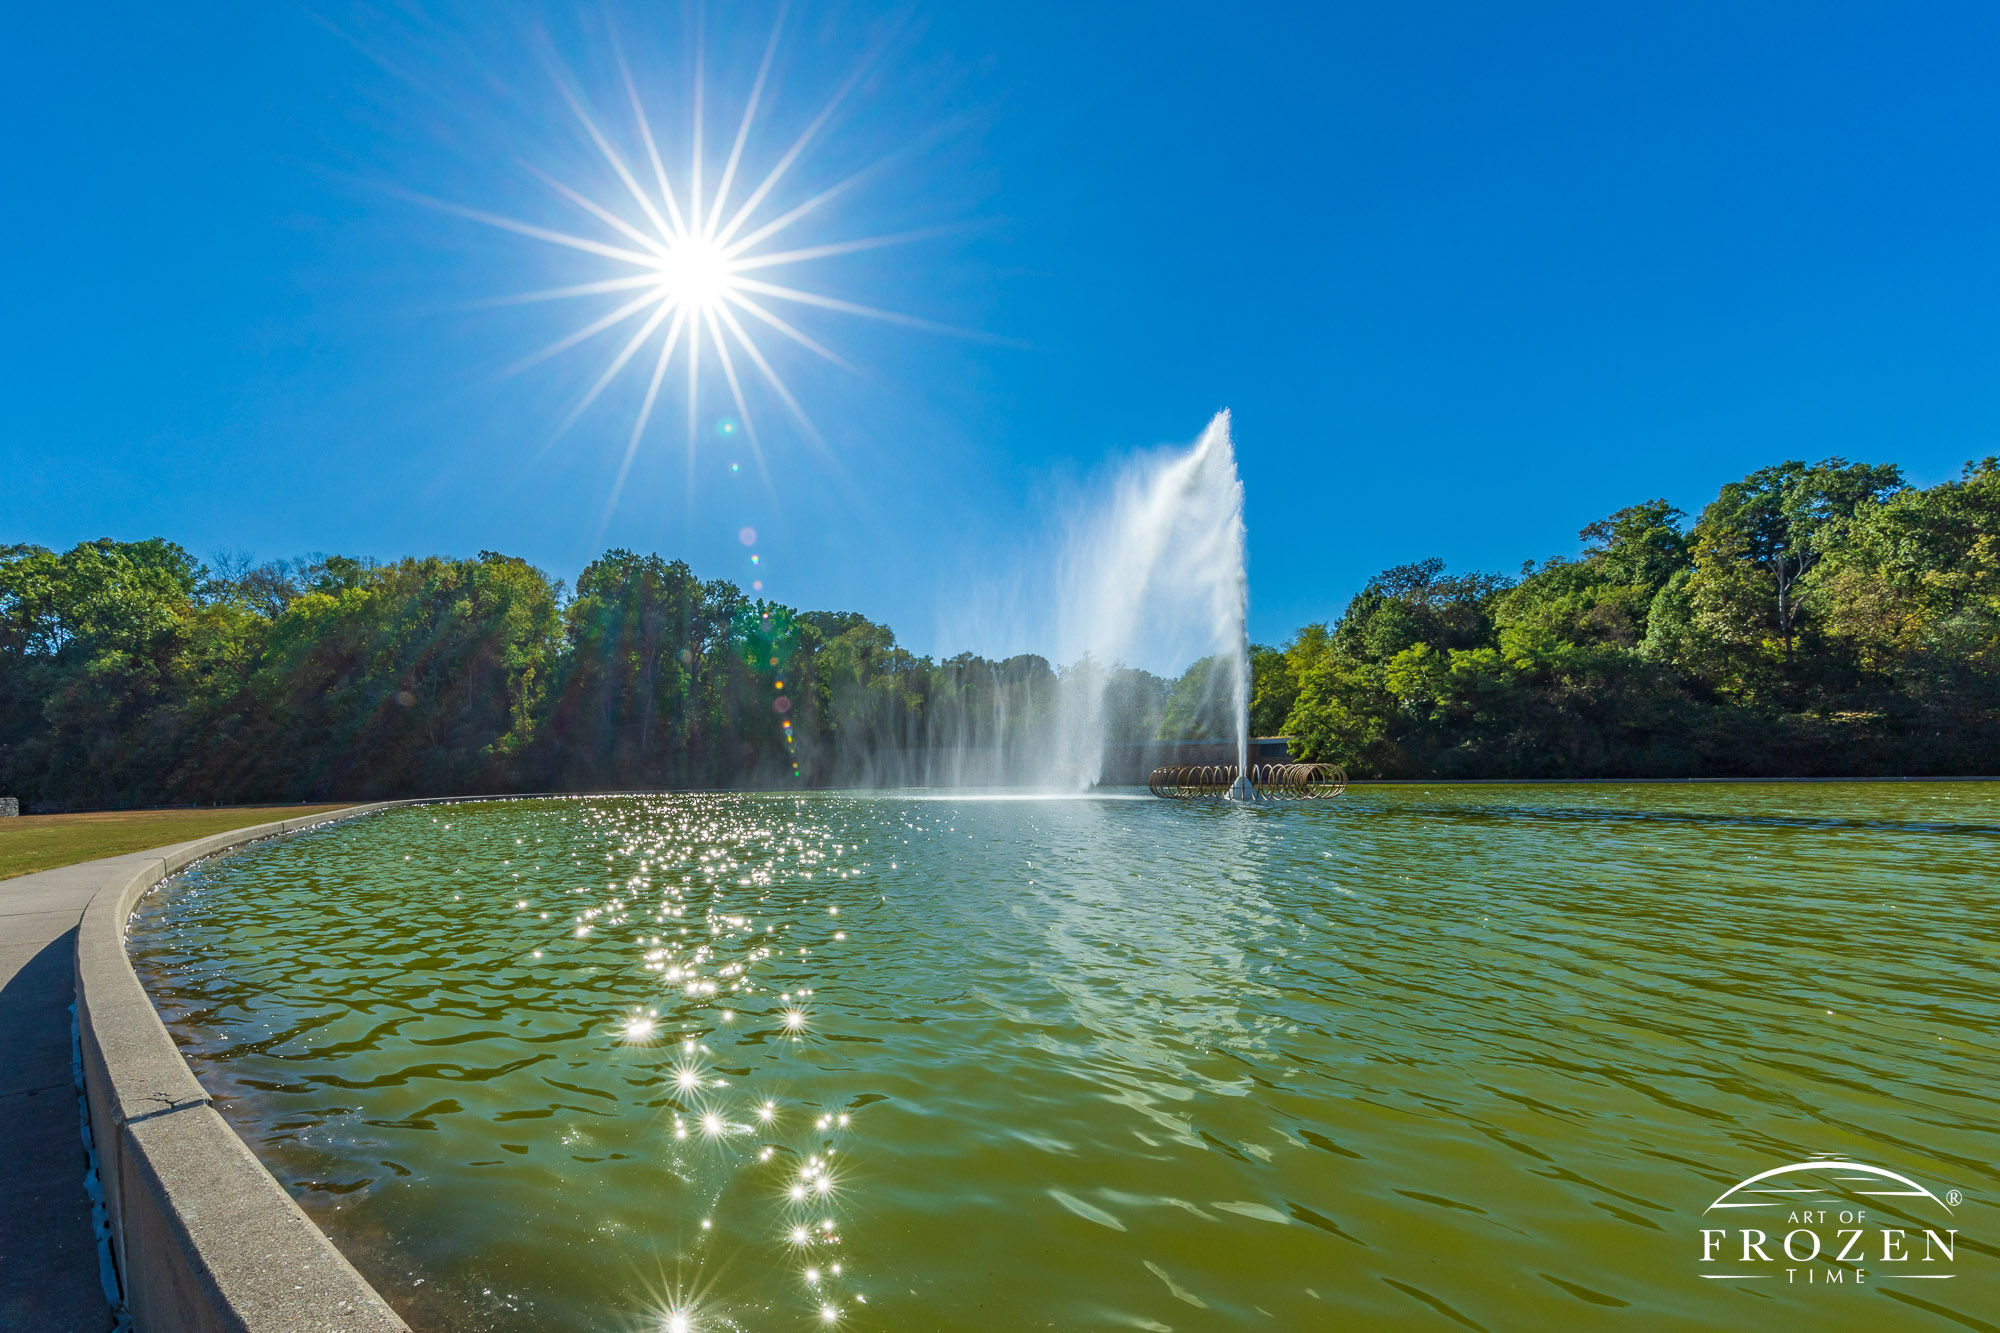 As a fountain casts streams of water into the air, the brilliant sun hanging the blue azure skies backlit the water spray